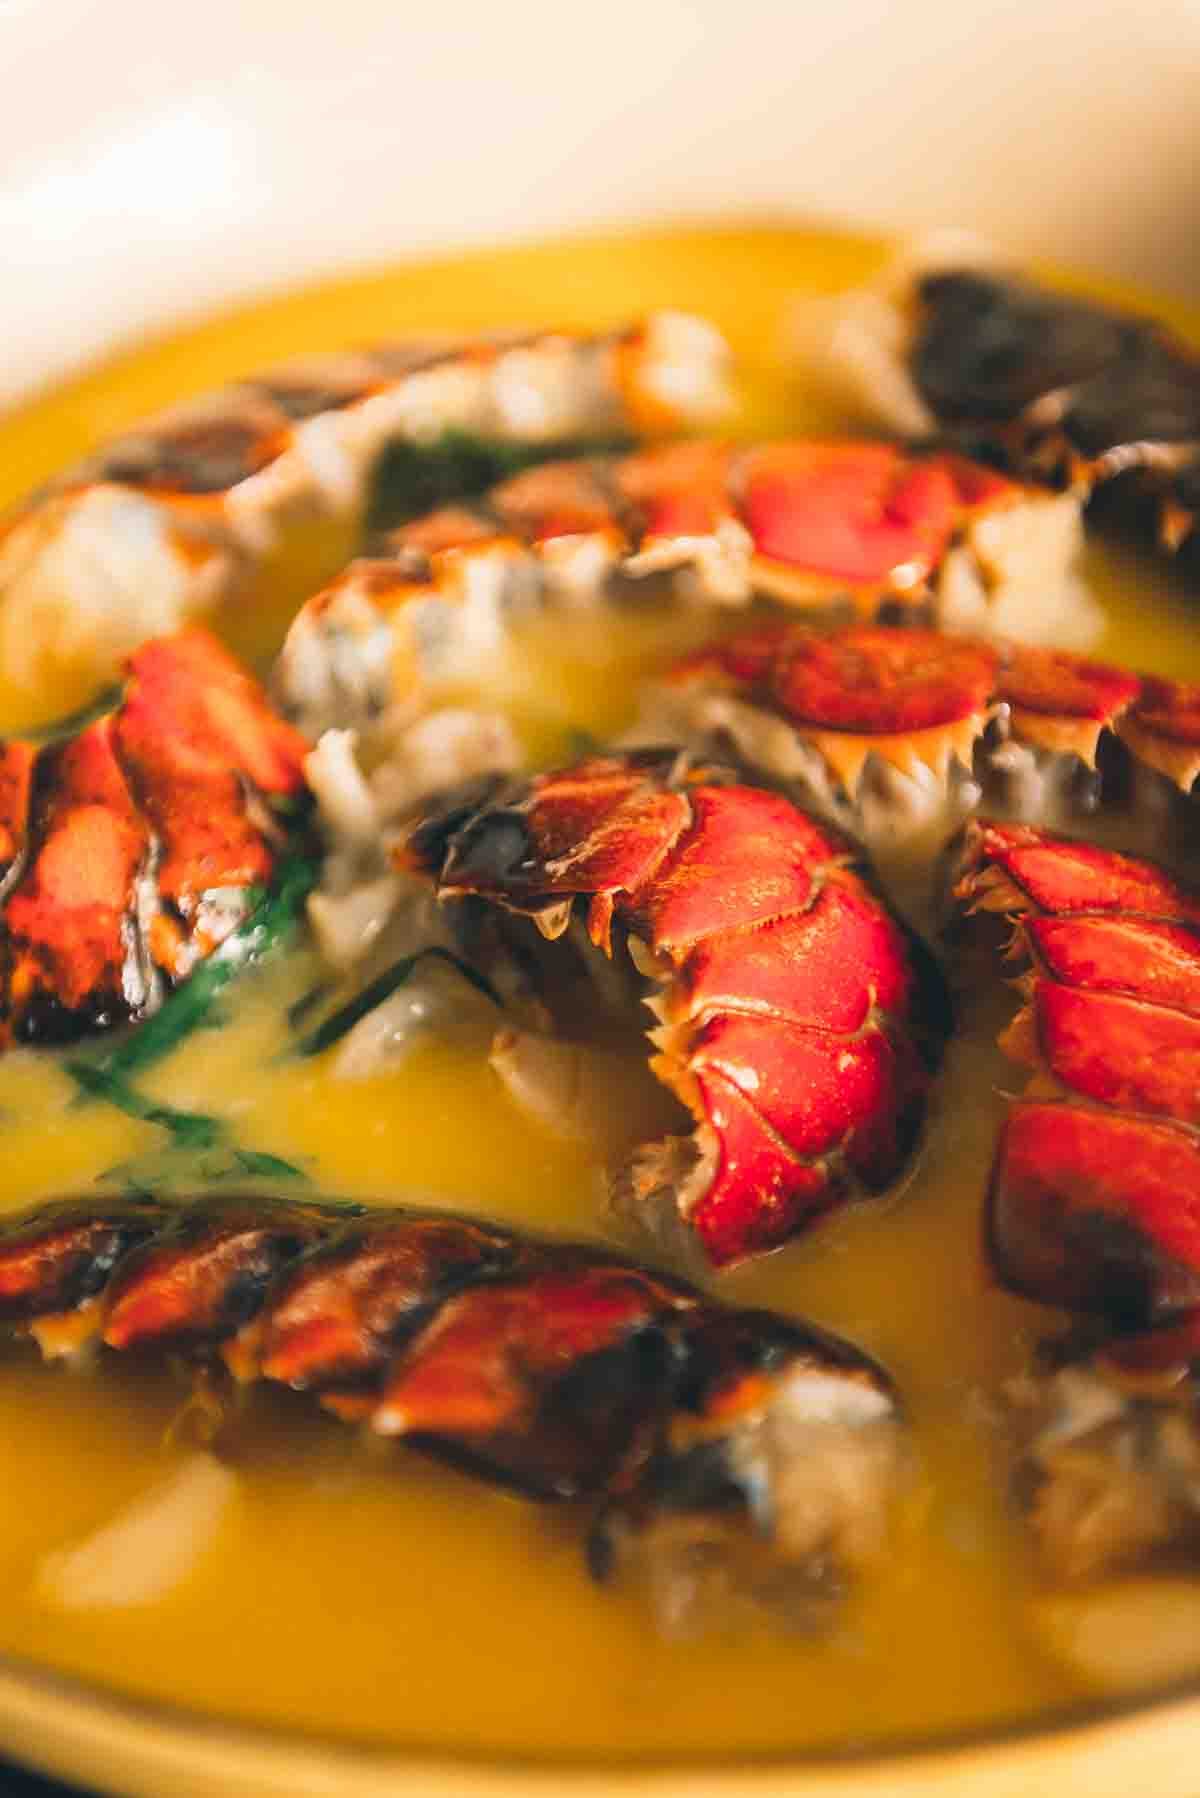 Red lobster shells in butter.